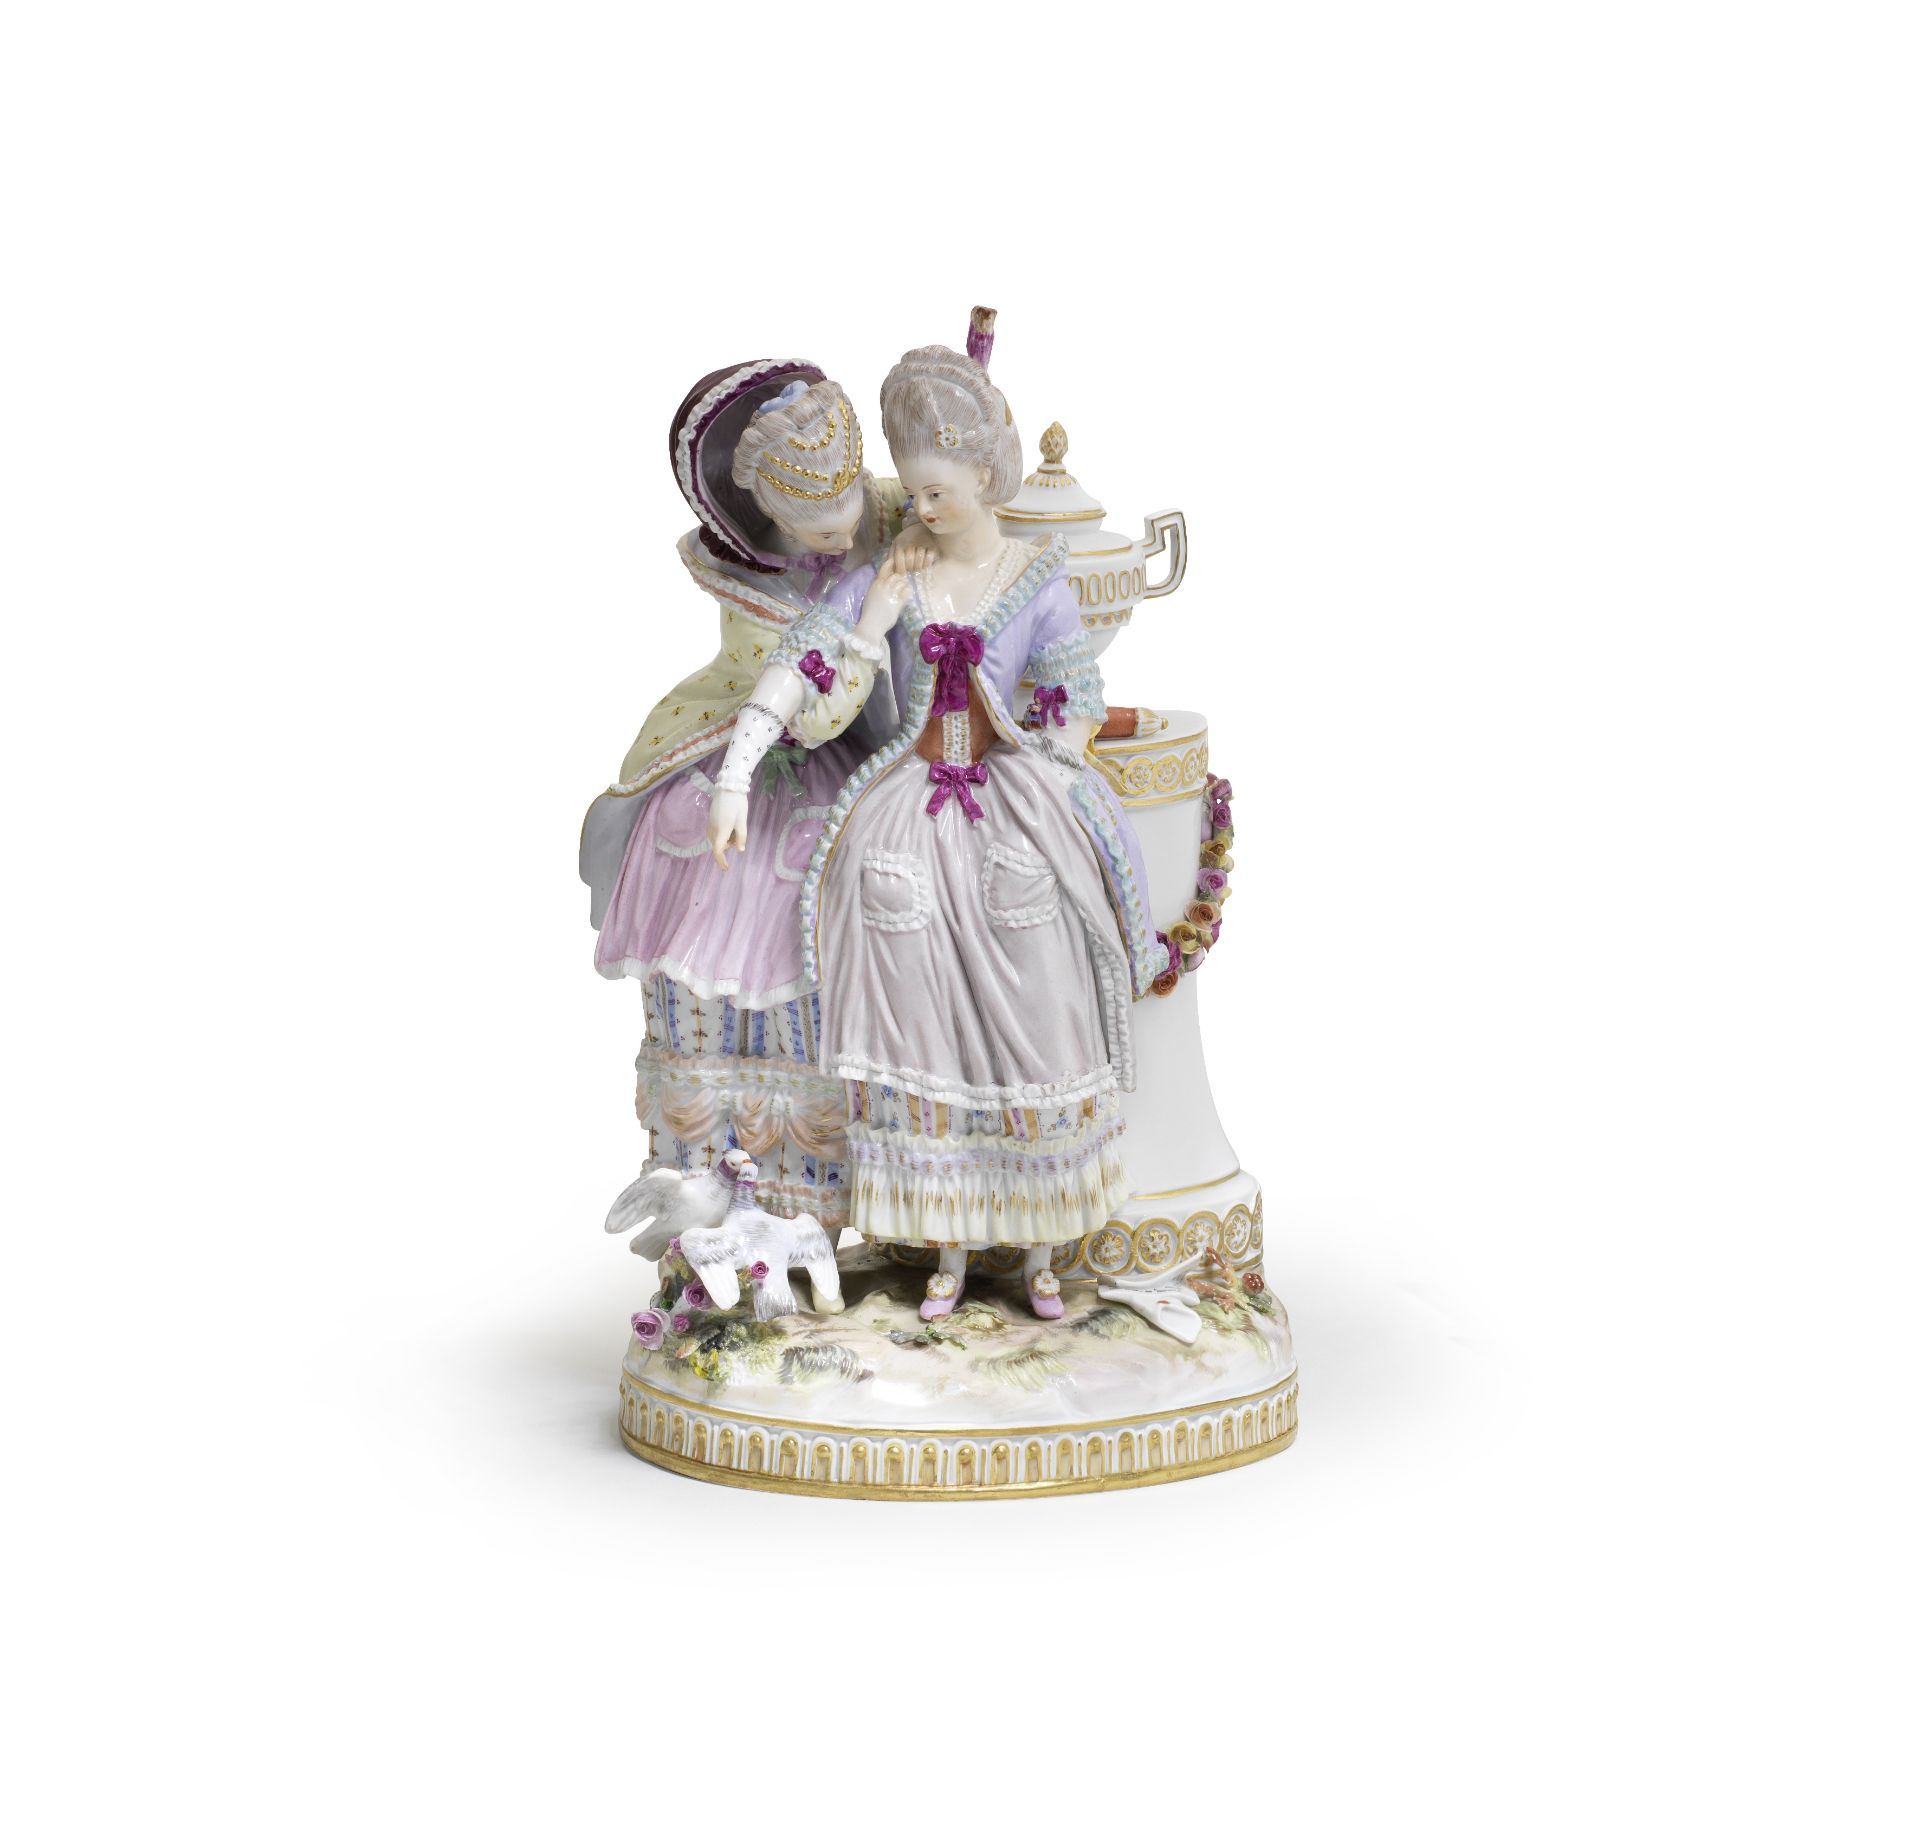 A Meissen group of two elegant ladies known as 'The Secret' or 'The Young Bride', late 19th century